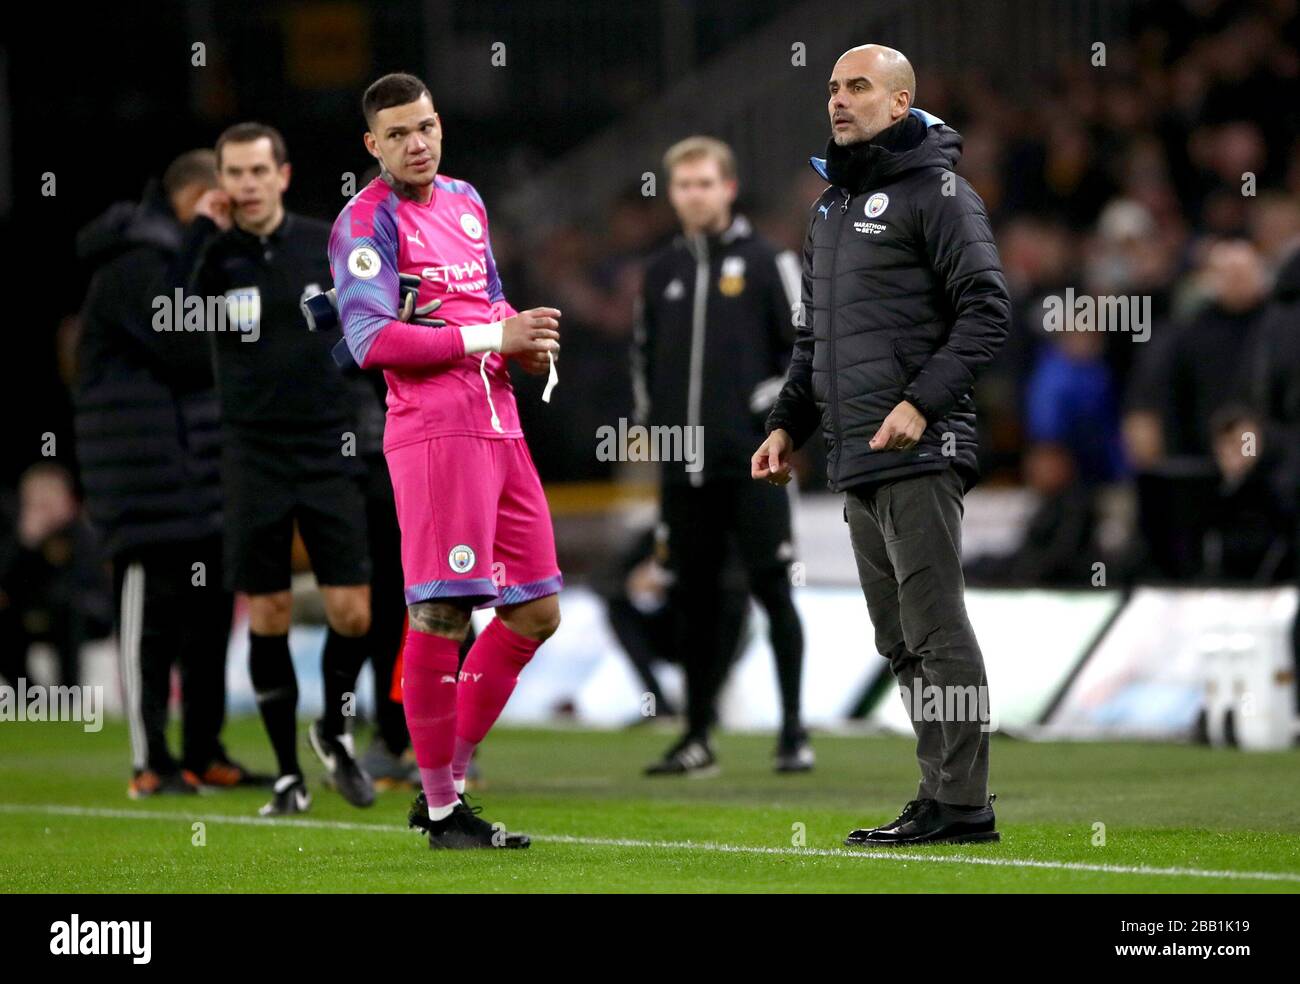 Manchester City goalkeeper Ederson (left) speaks to manager Pep Guardiola after receiving a red card from Referee Martin Atkinson Stock Photo